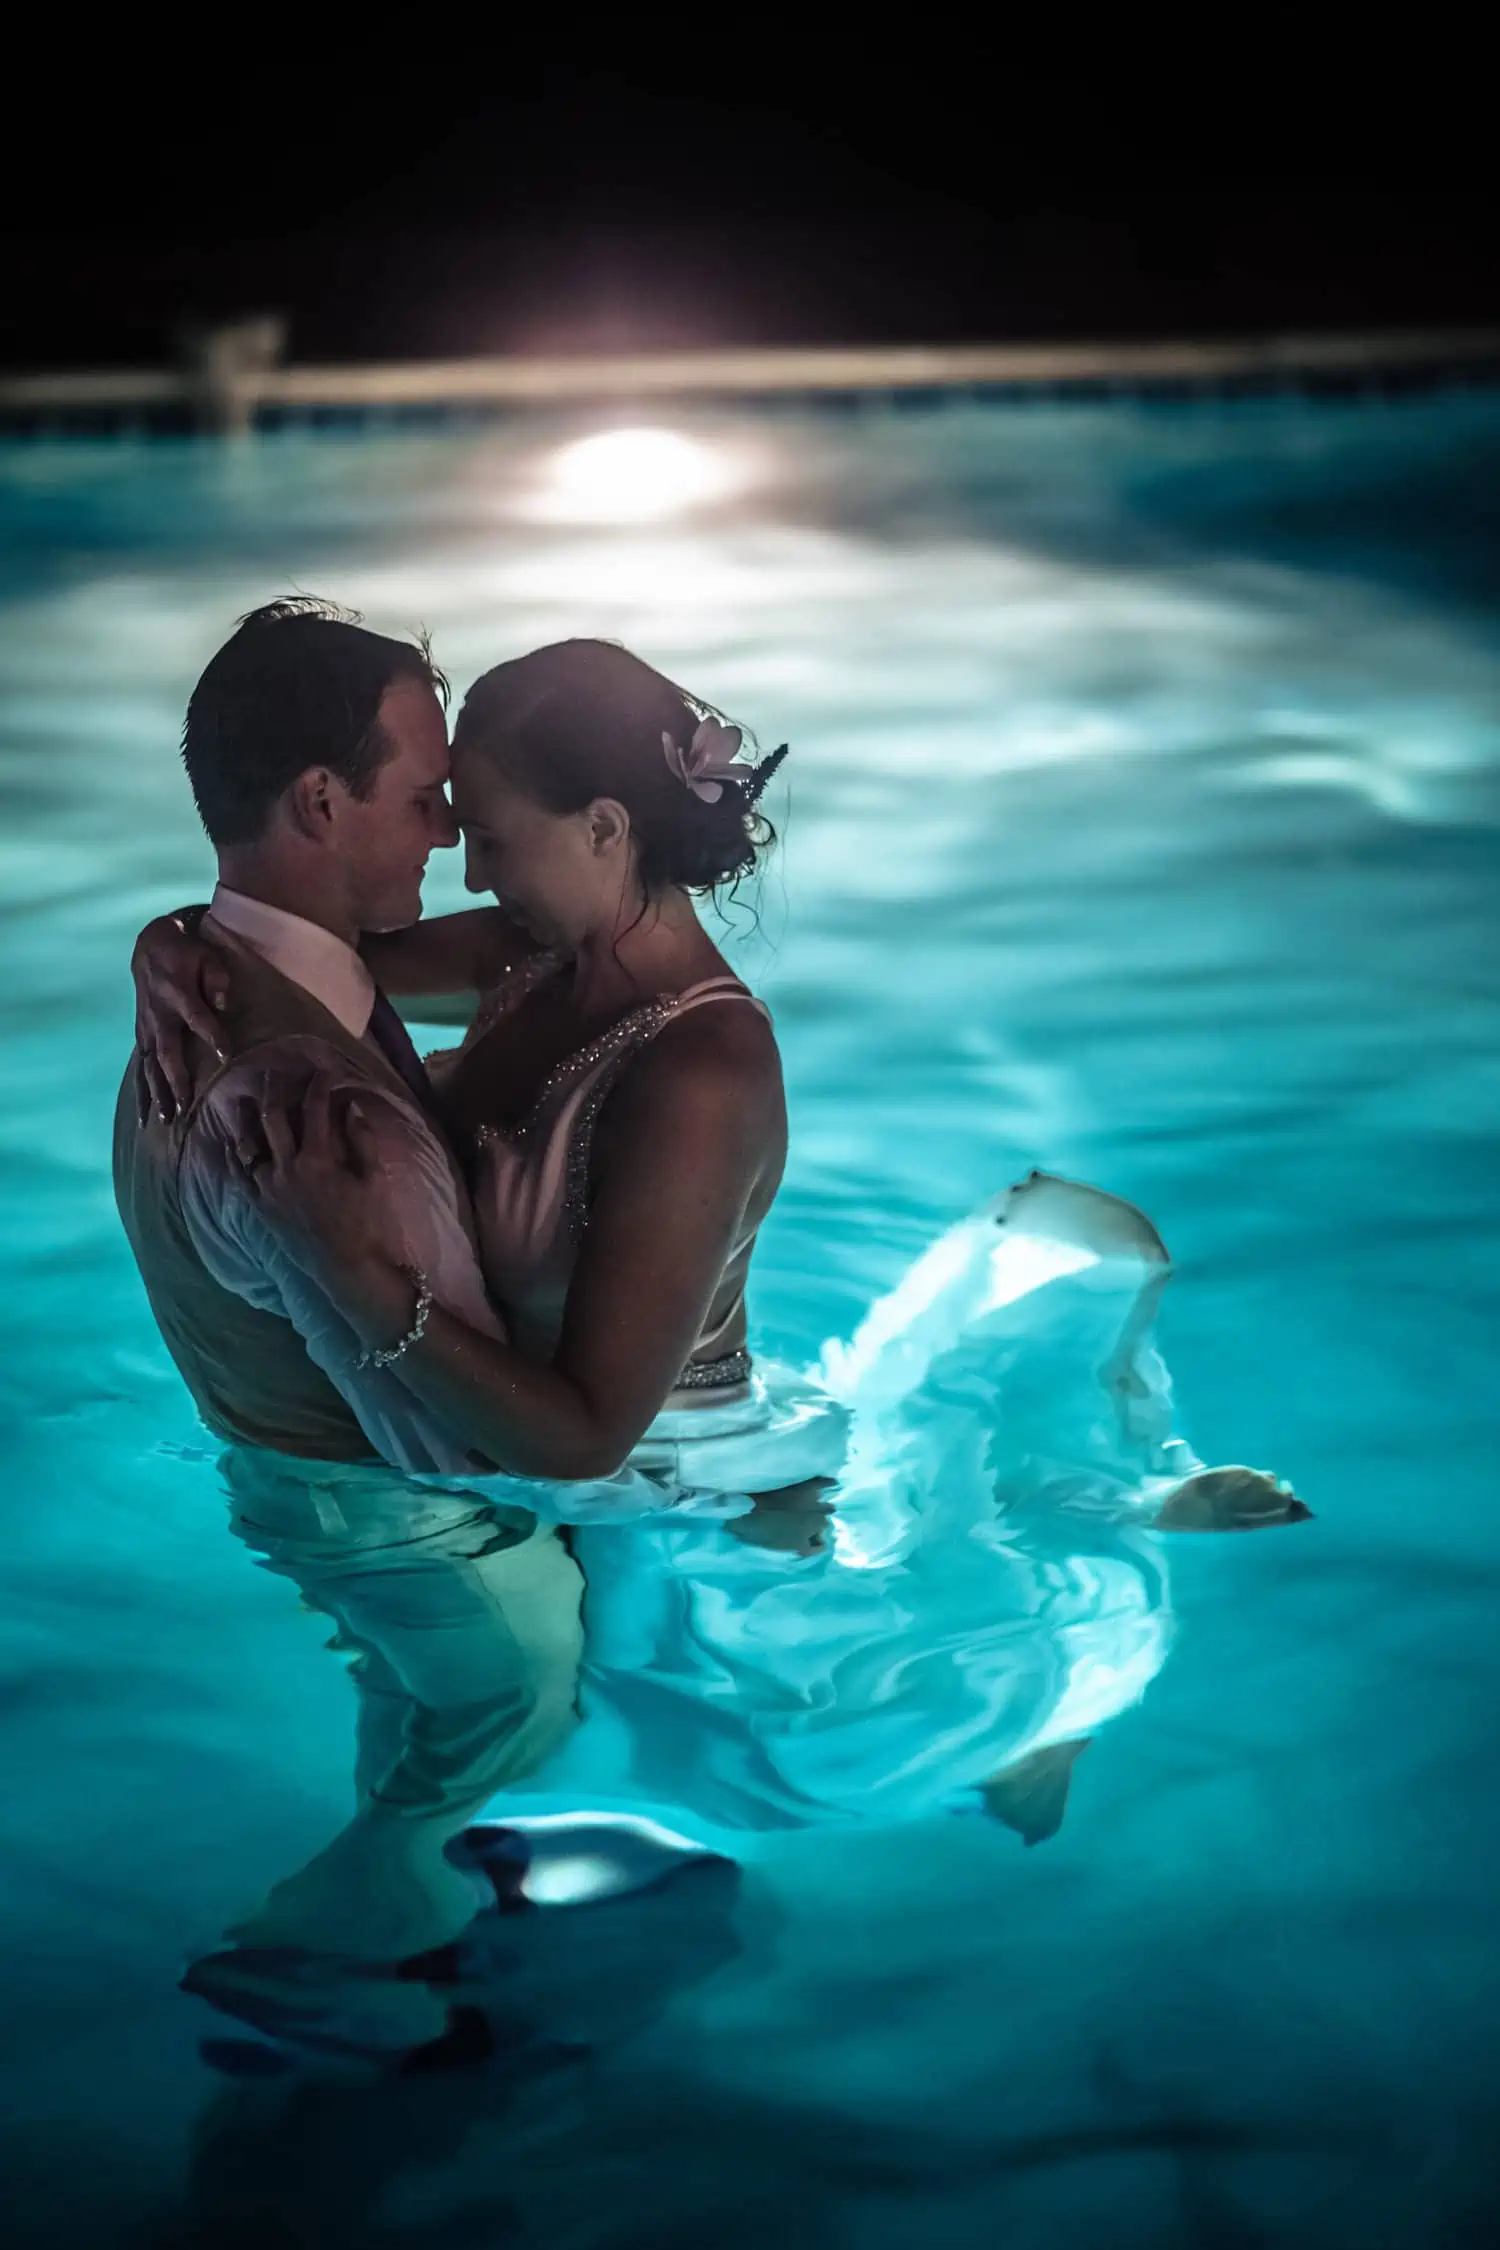 A bride and groom embracing in a pool at night.